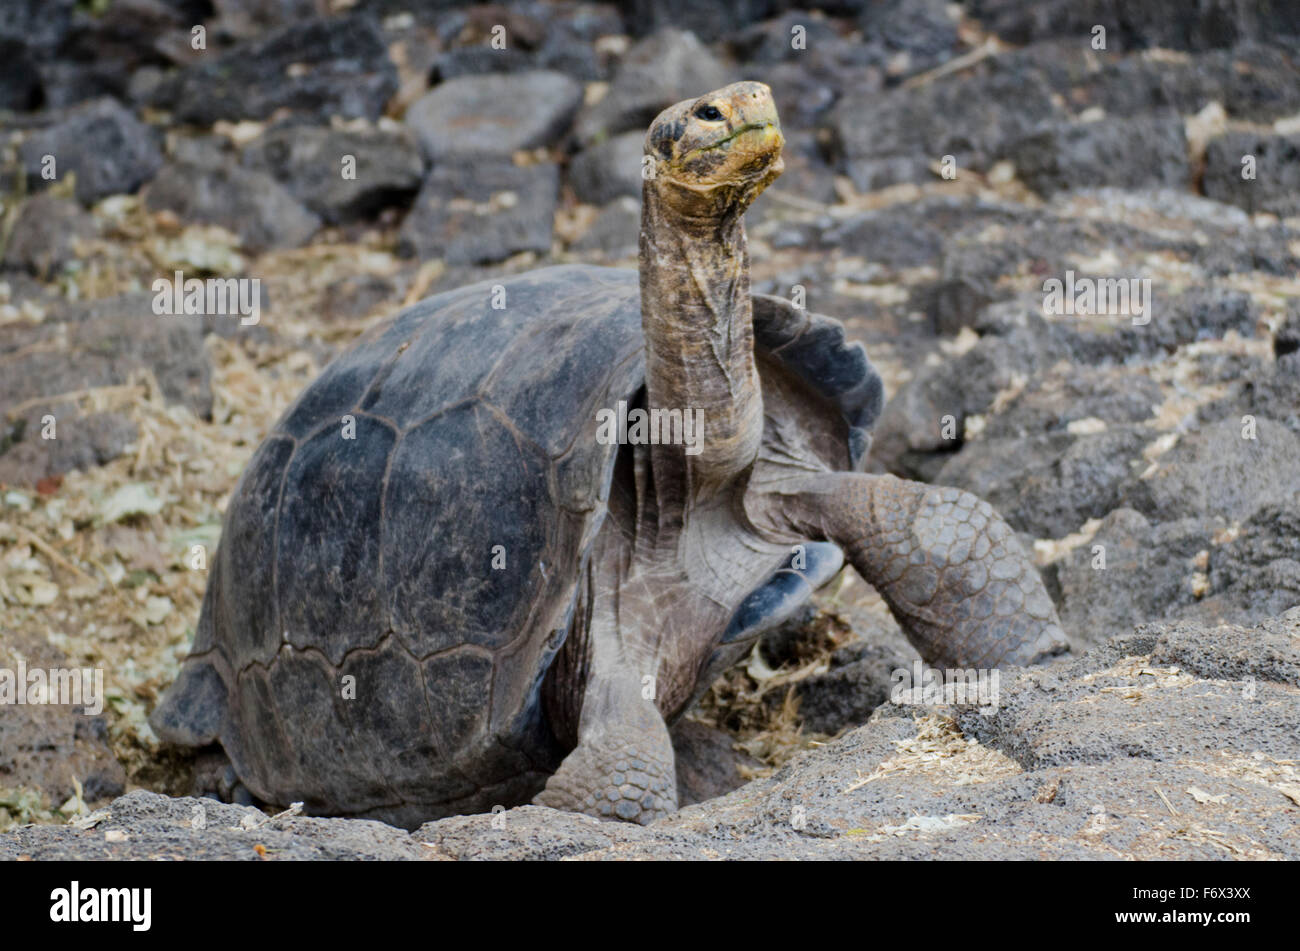 A Giant Galapagos Tortoise (Chelonoidis nigra) from the Charles Darwin Research Station. Stock Photo